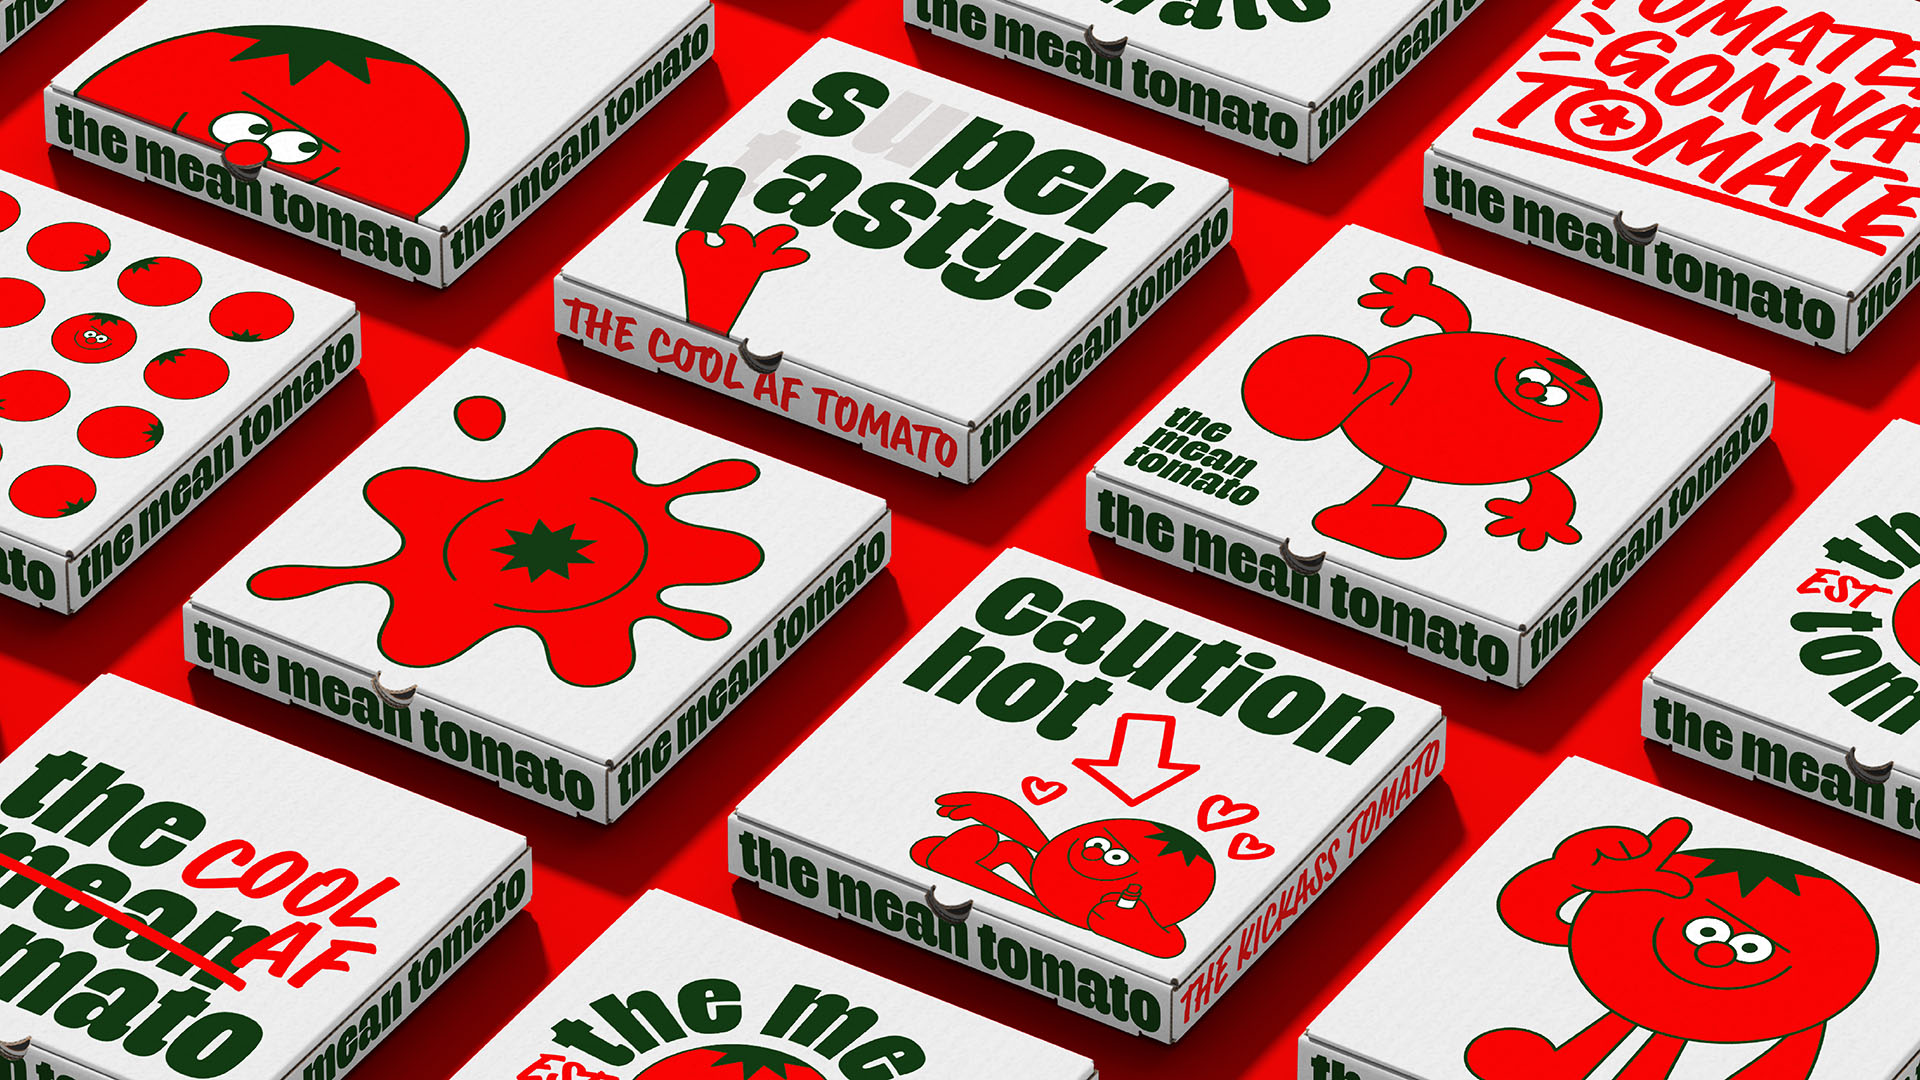 The Mean Tomato Take-Out Pizza Branding and Packaging Design